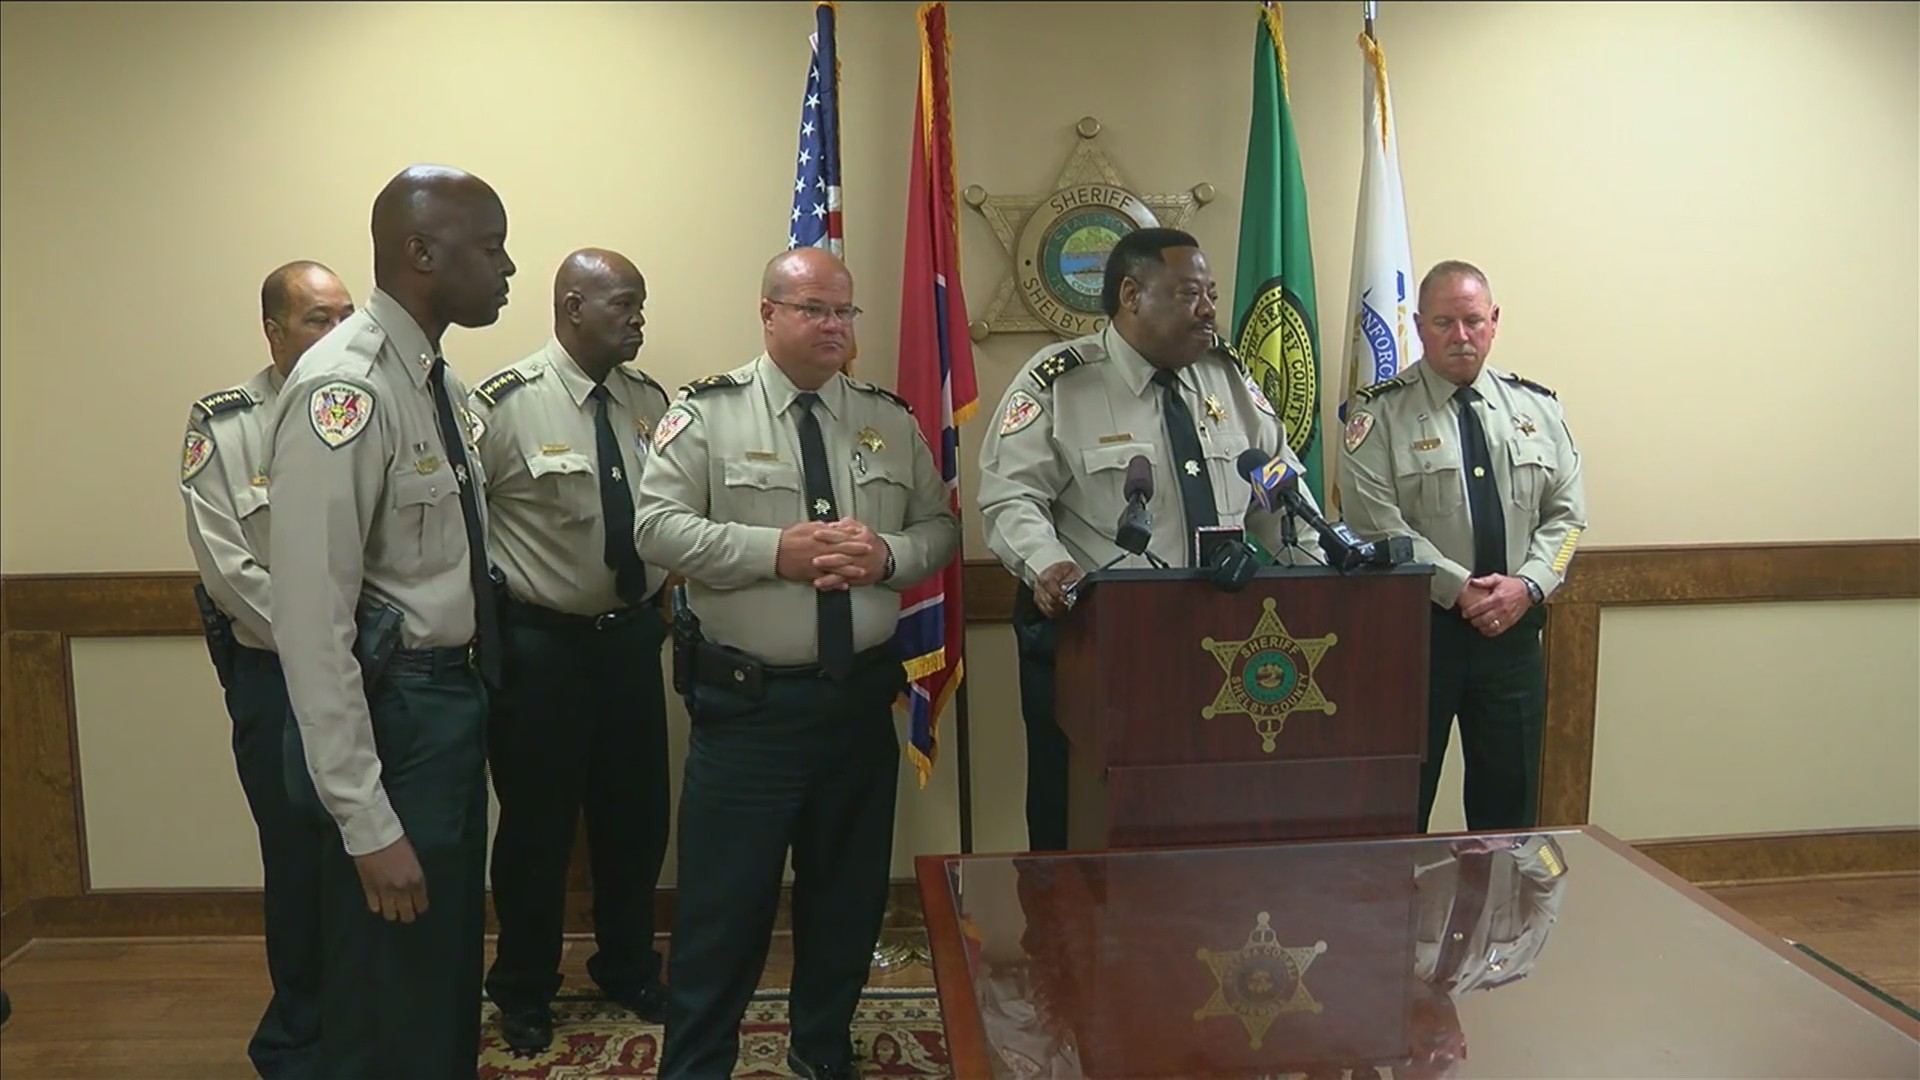 WEB EXTRA: Shelby County Sheriff’s Office news conference on deputies injured in shooting